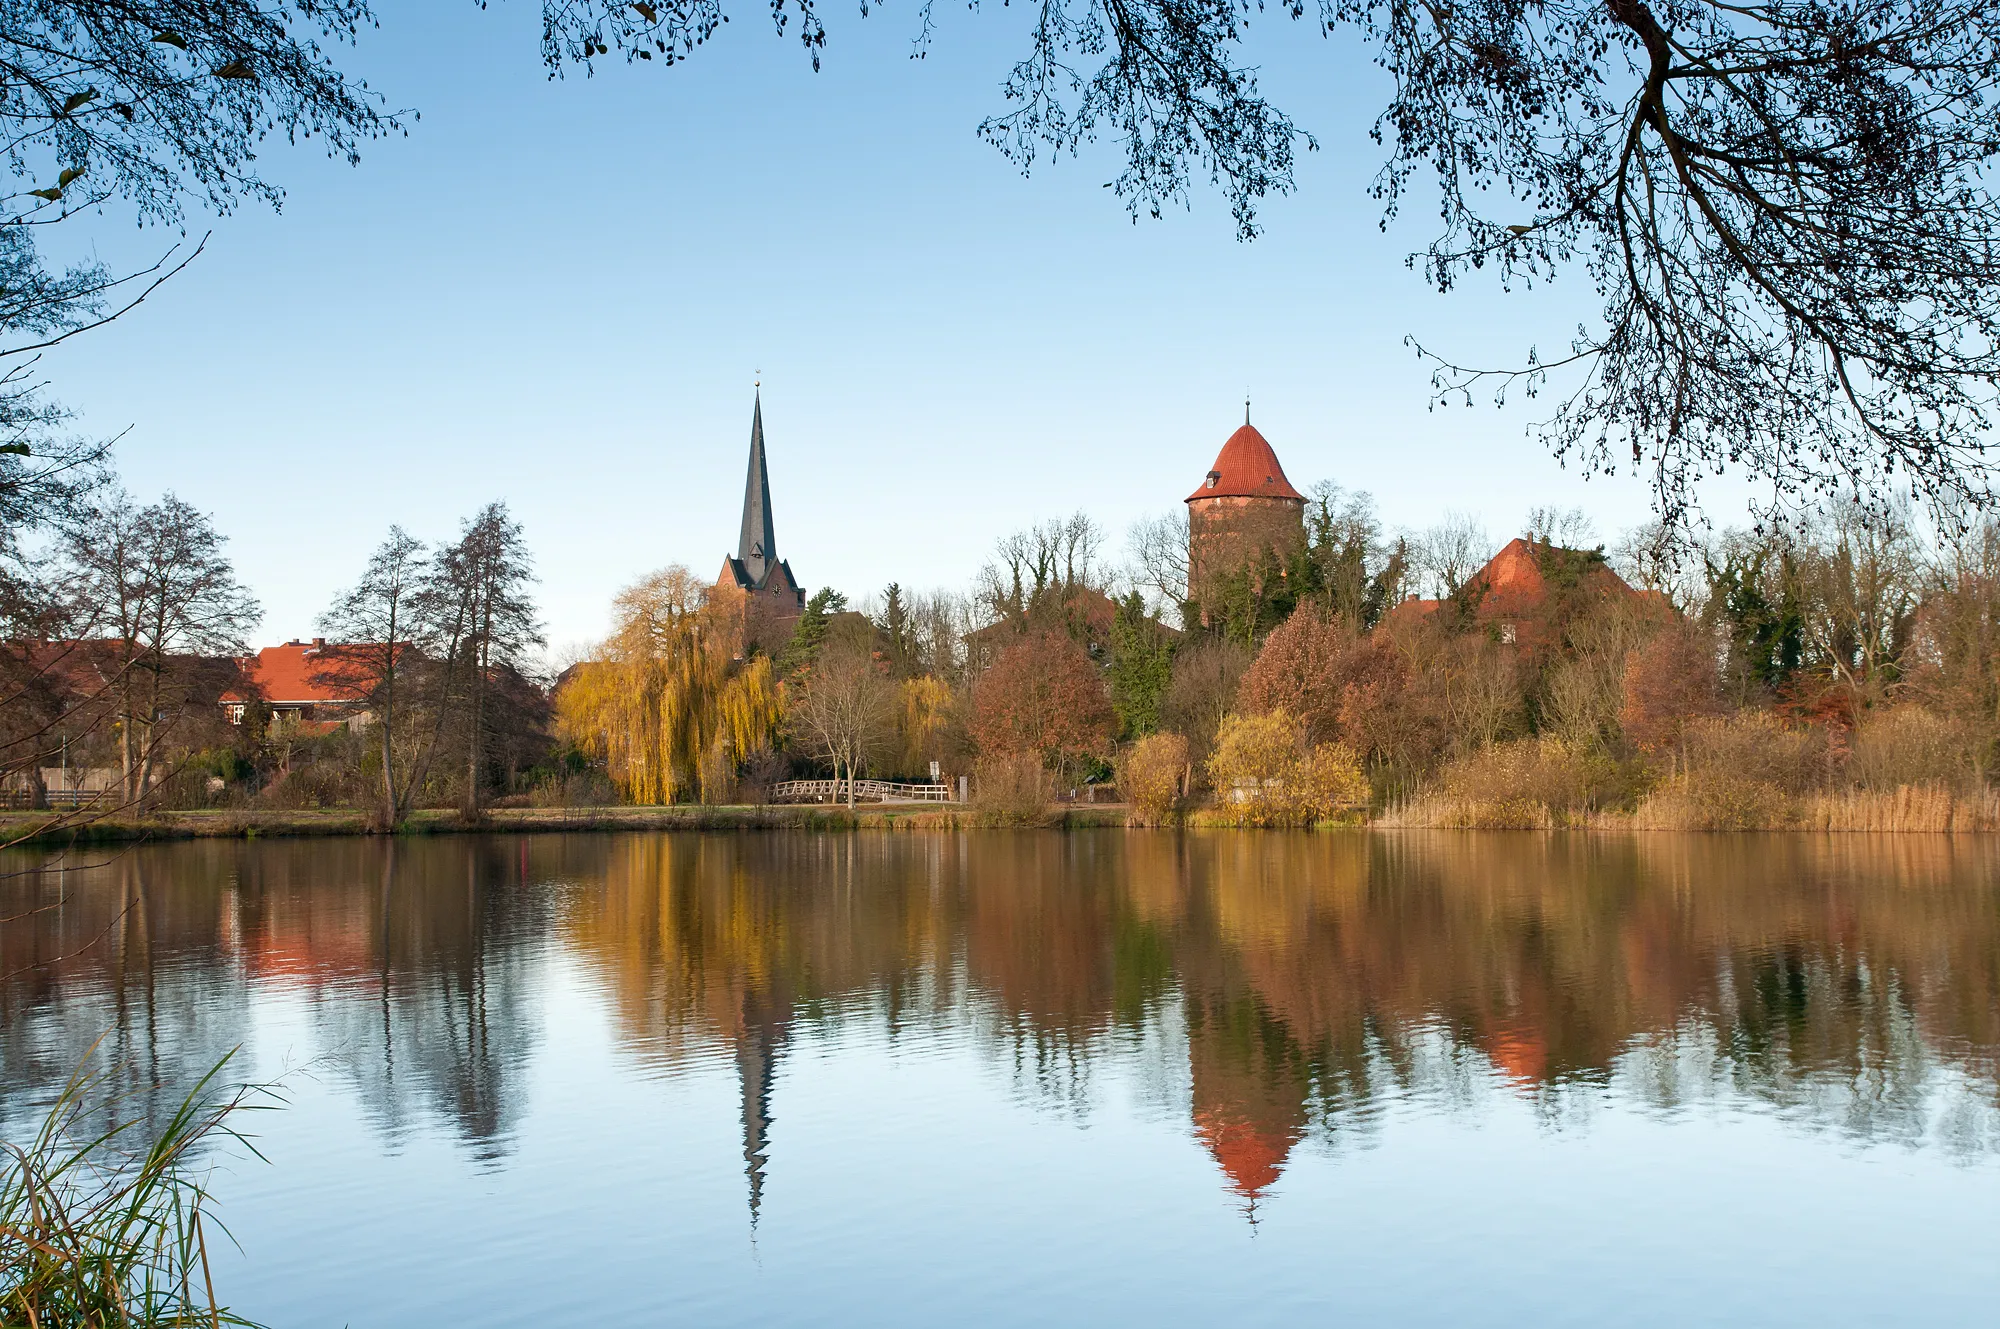 Photo showing: View from the lake "Thielenburger See" to the old town skyline of Dannenberg (Elbe) in late autumn. You can see both town landmarks, the church St. Johannis and the castle tower "Waldemarturm".